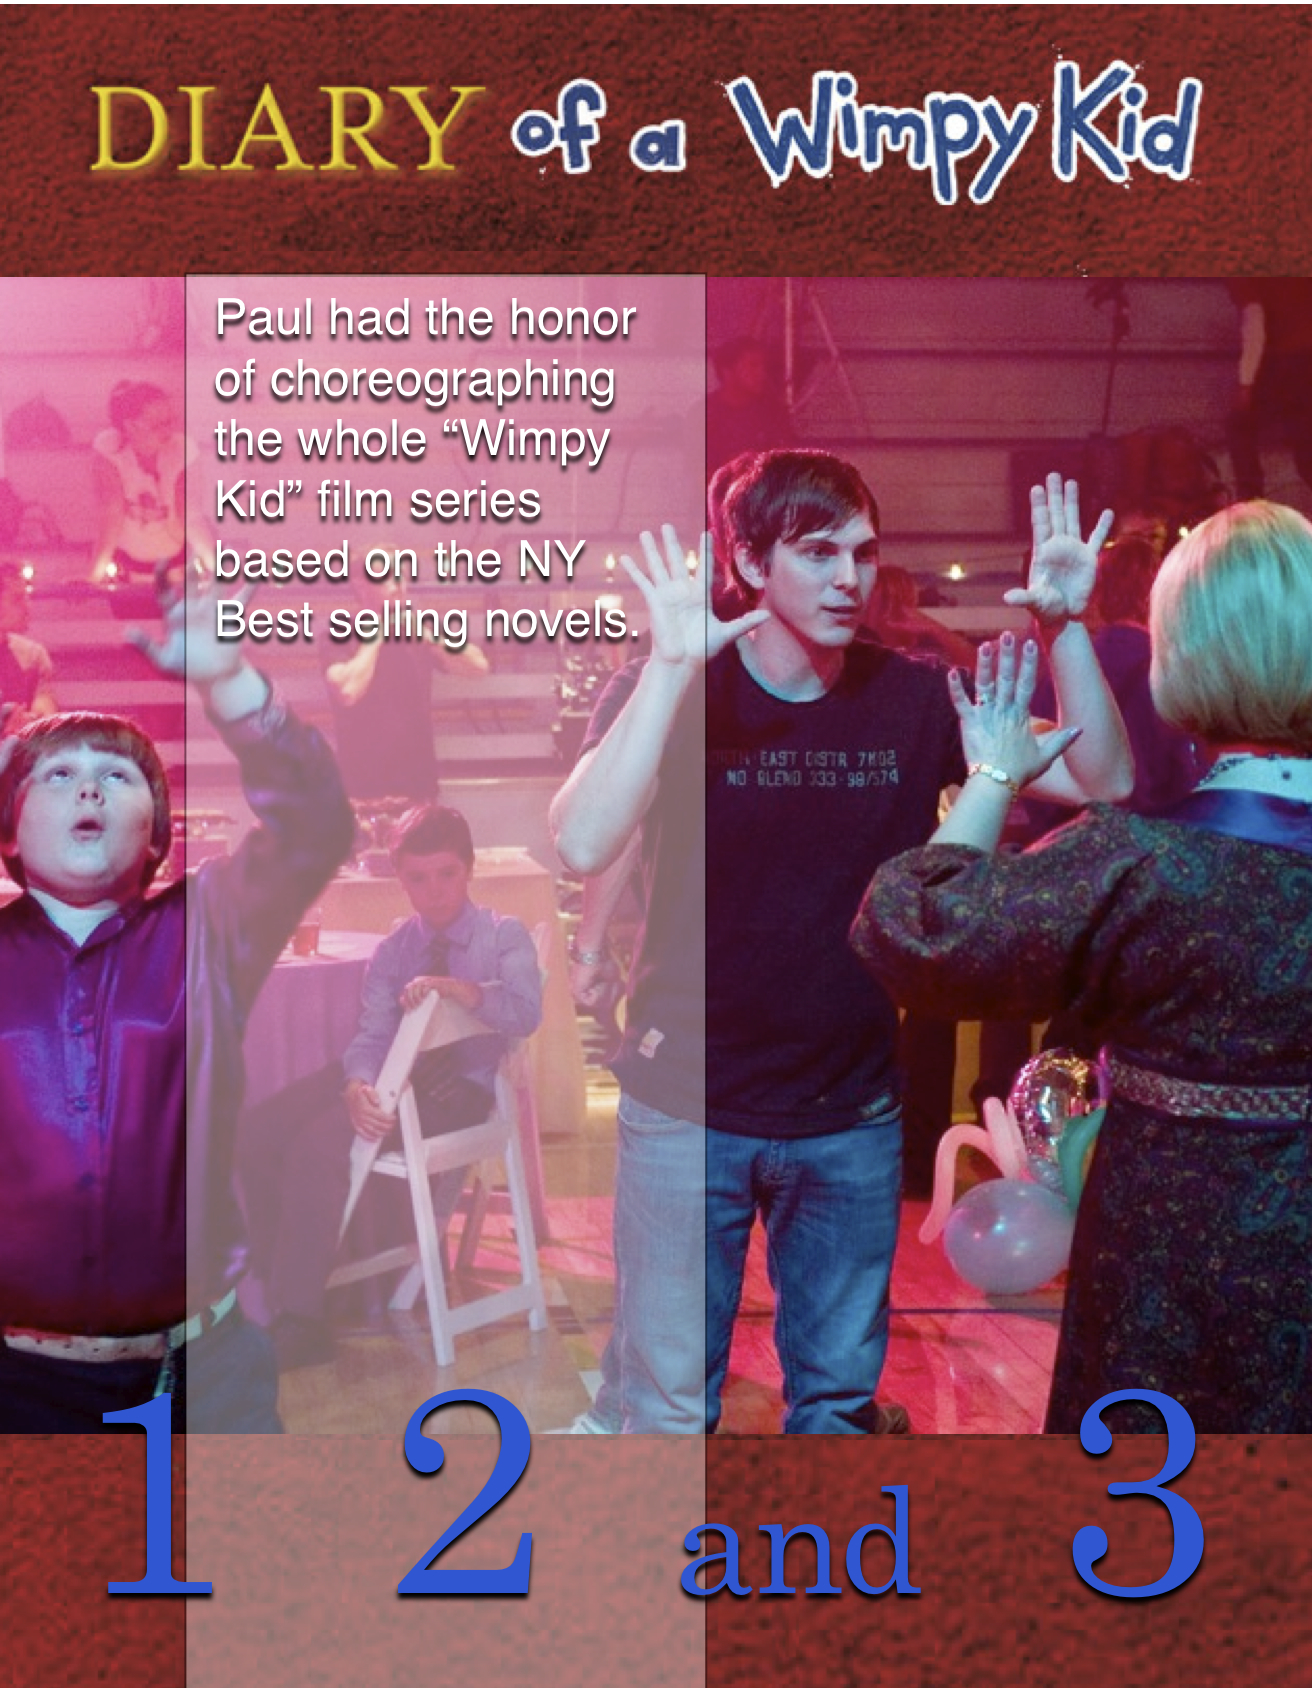 Paul Becker choreographed all 3 Diary of a Wimpy Kid Films.